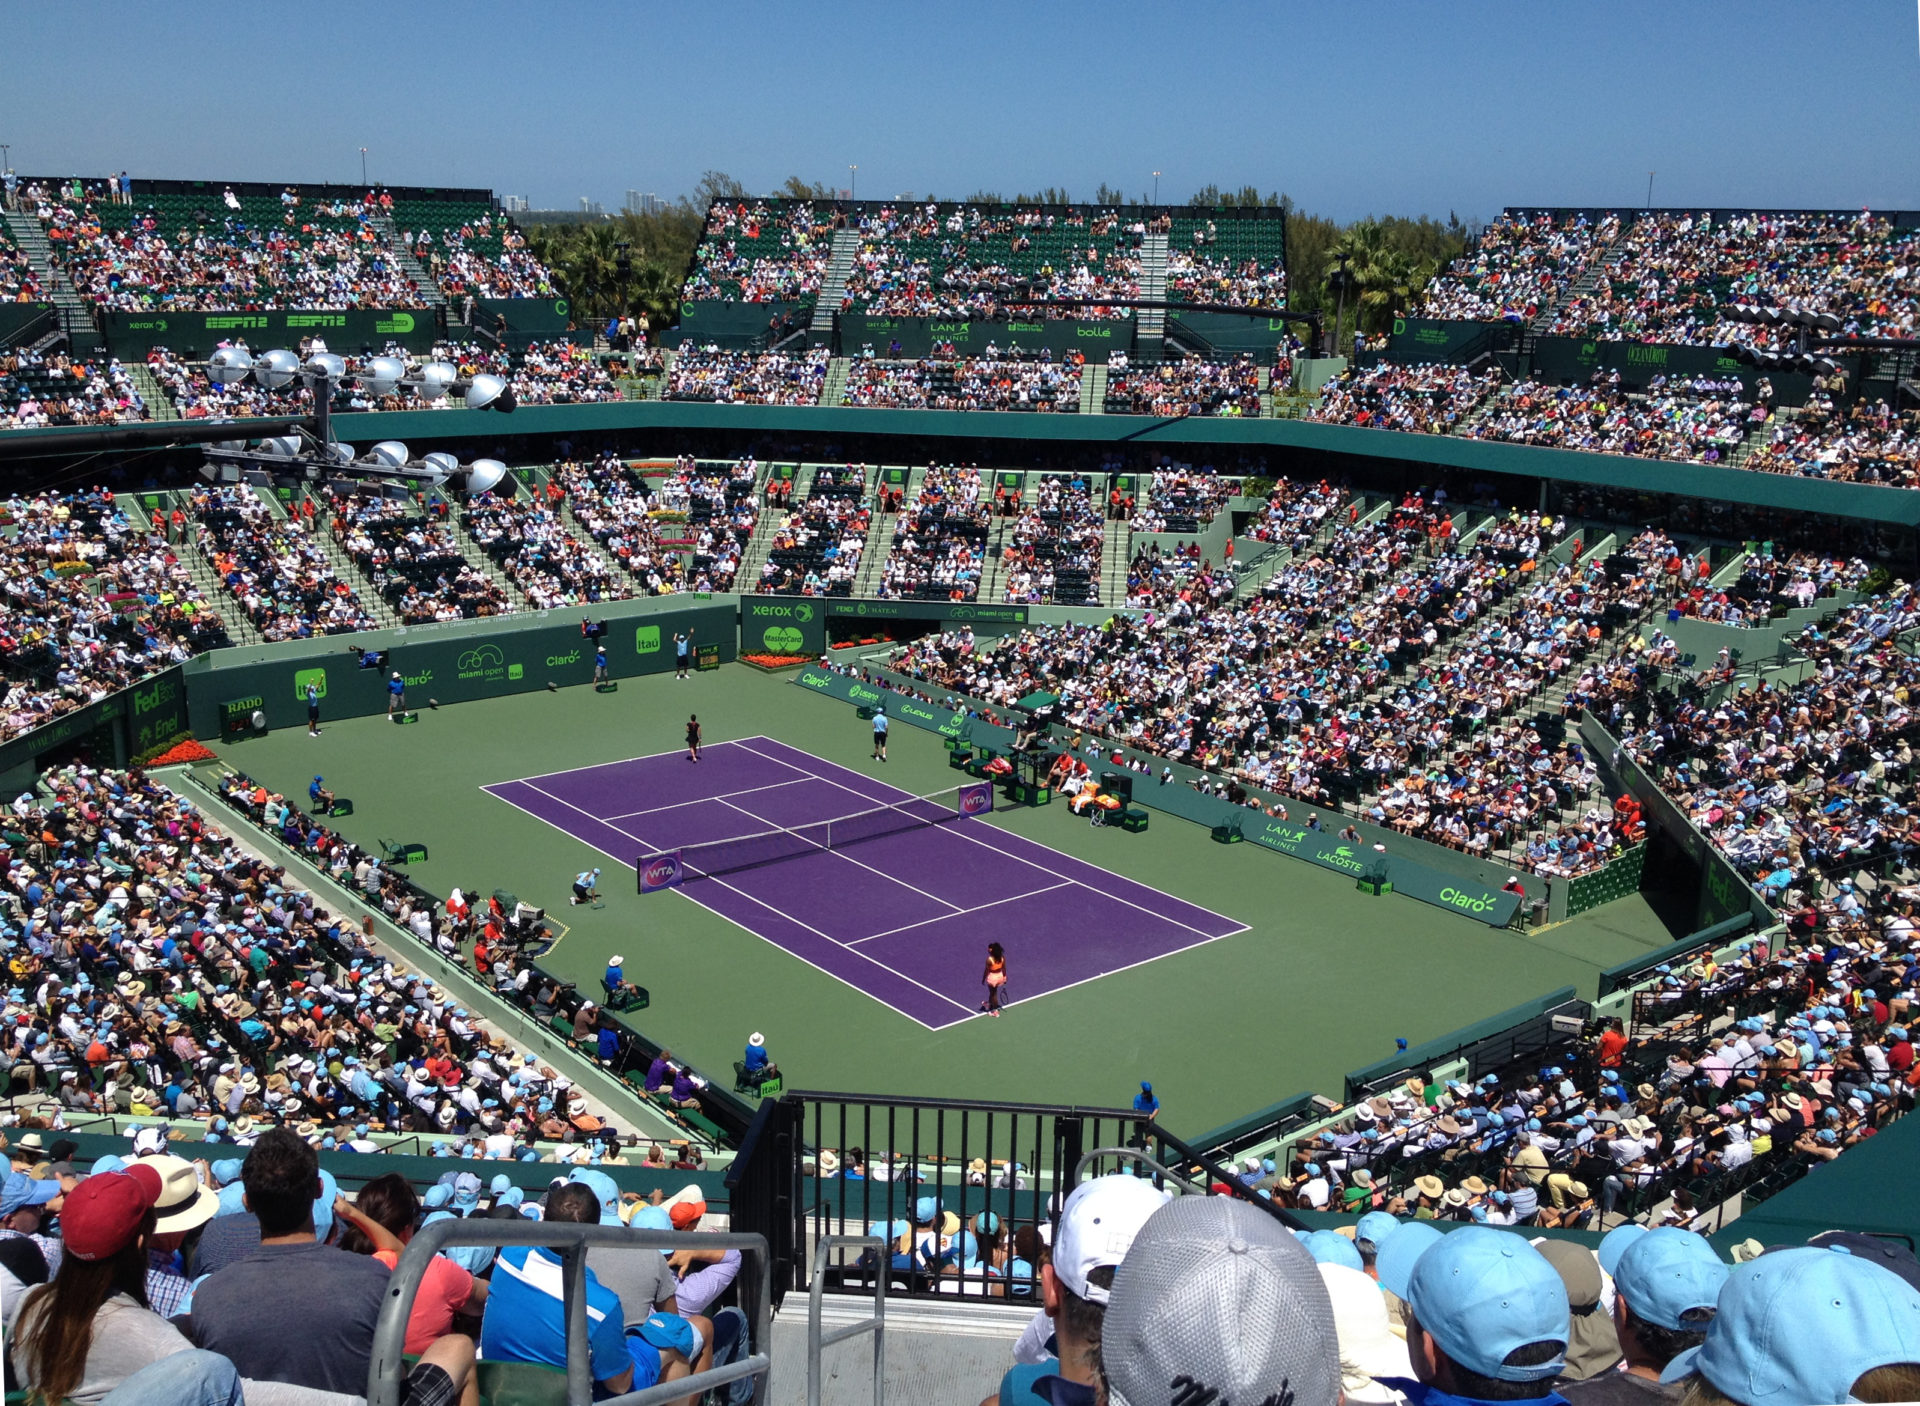 miami open 2021 tennis semi finals and finals how to watch schedule predictions